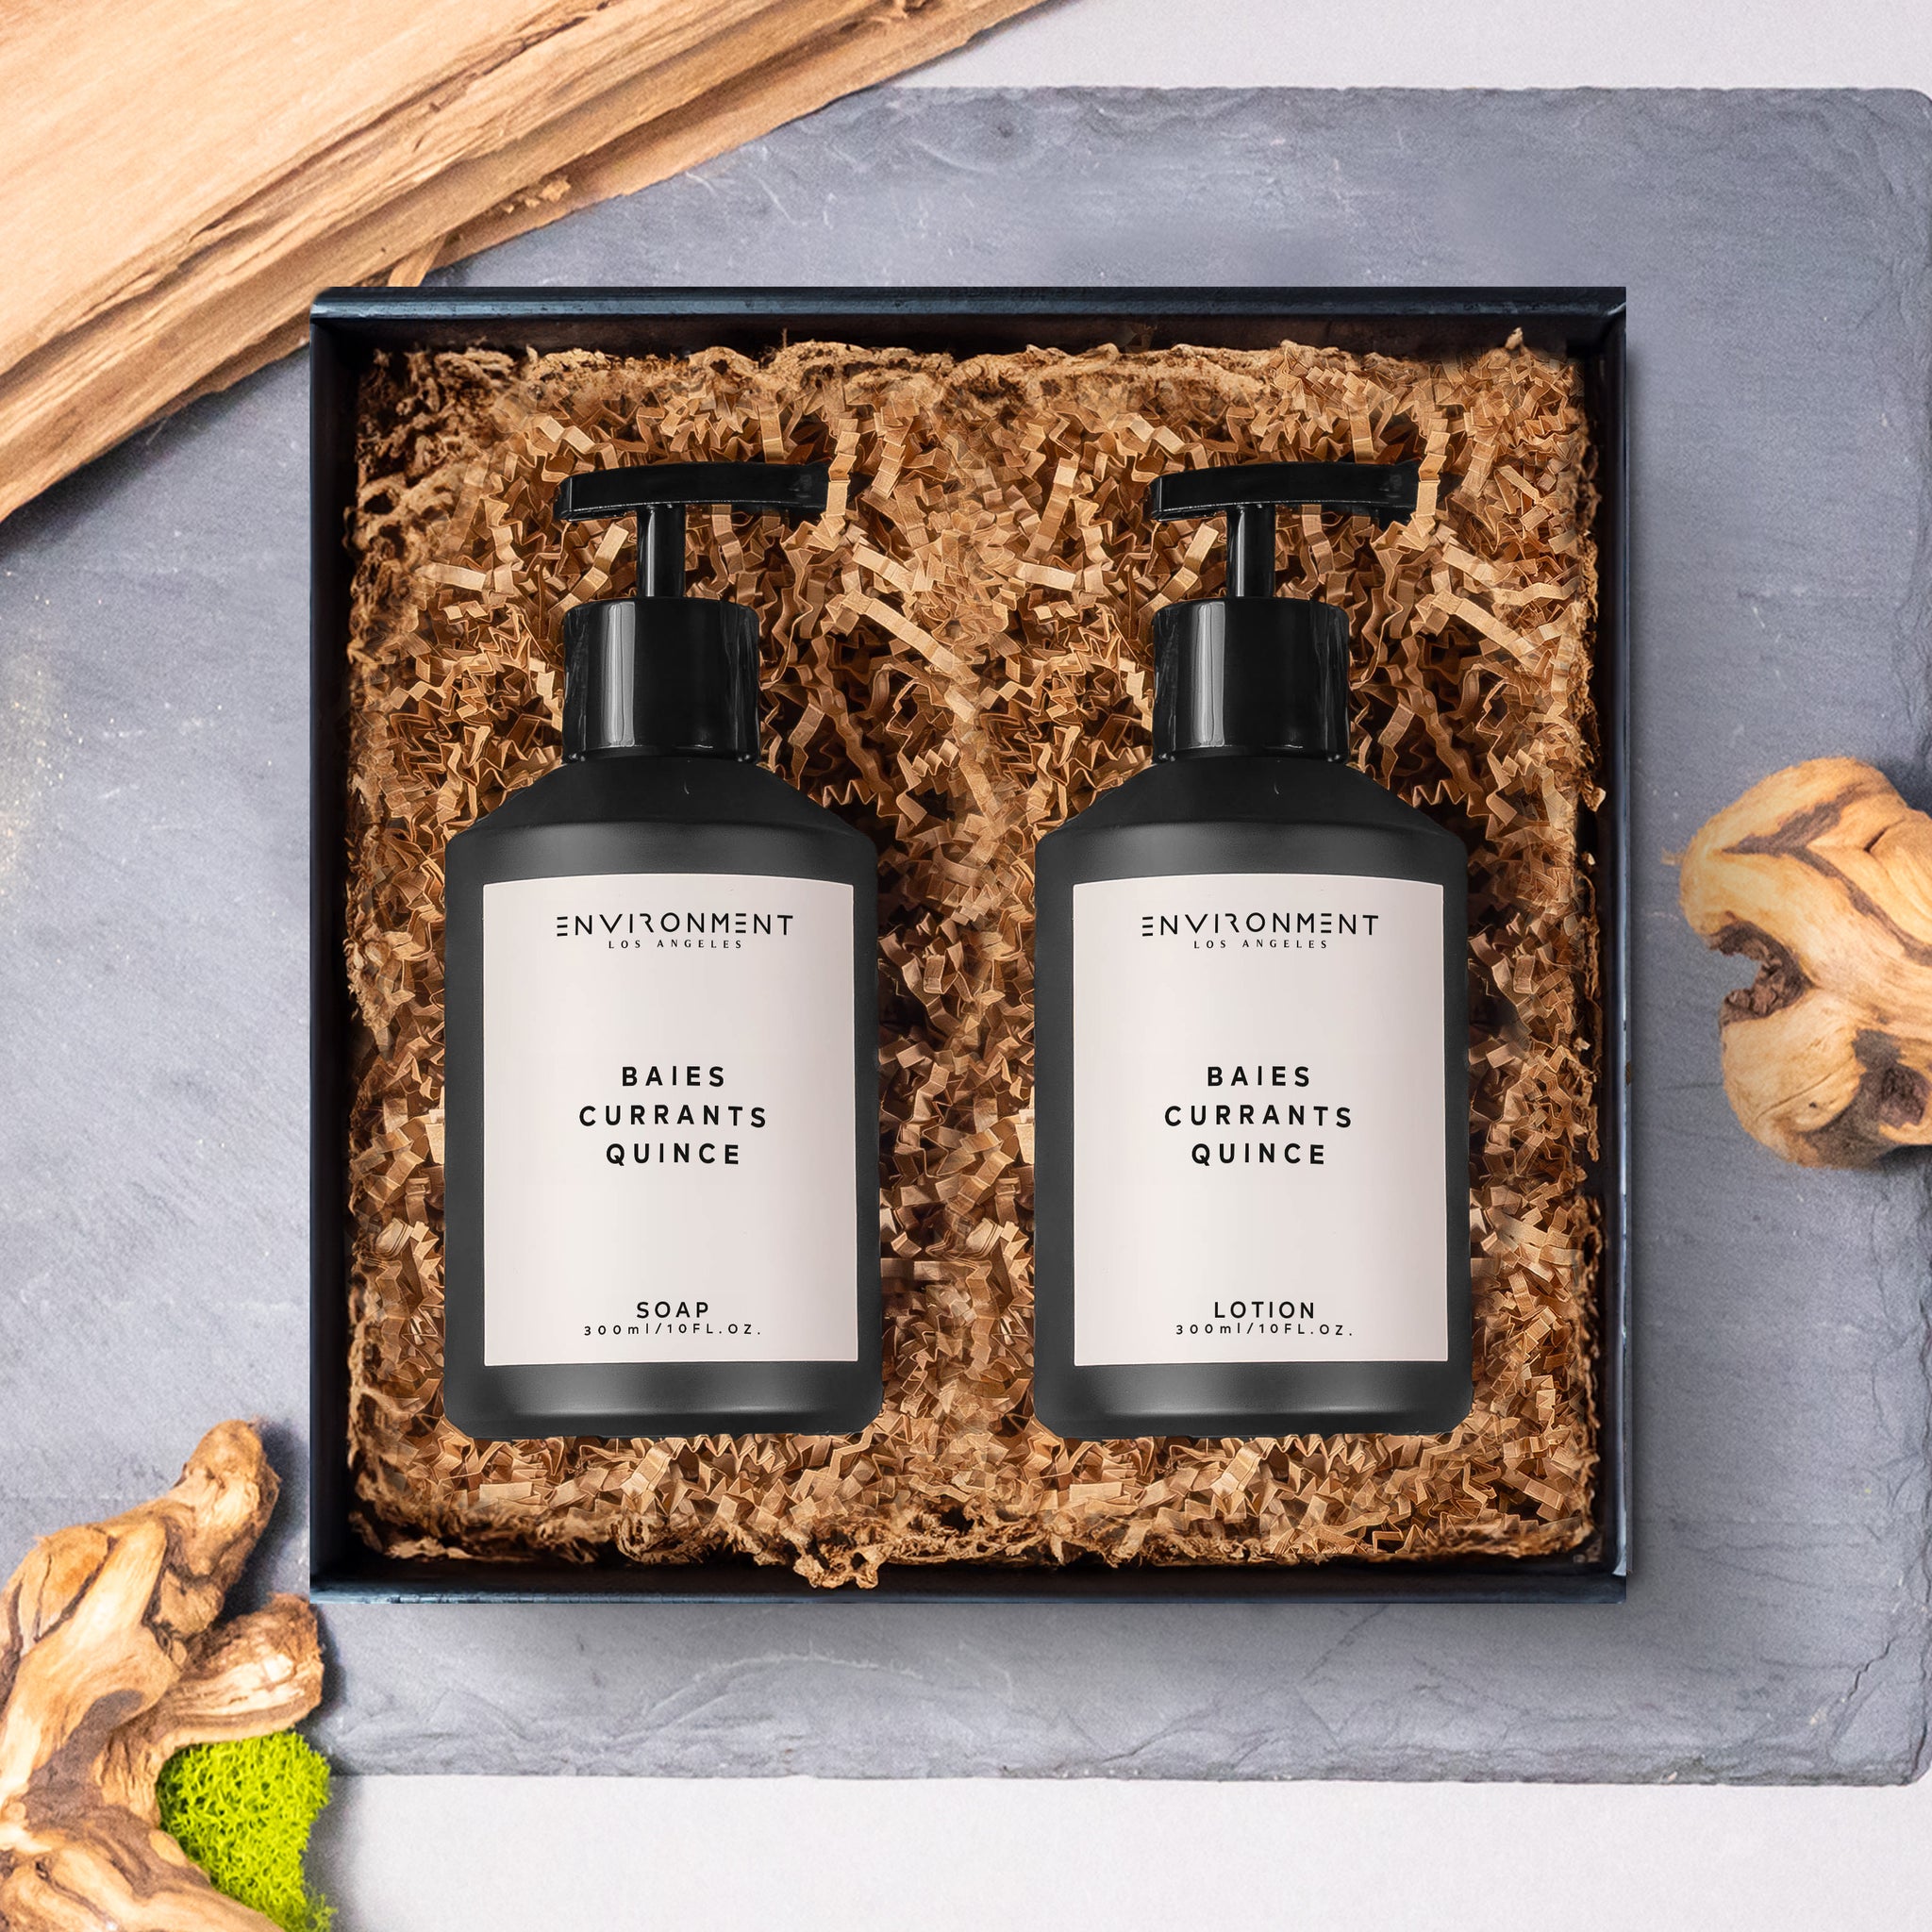 Baies | Currants | Quince 300ml Hand Soap and 300ml Lotion Gift Pack (Inspired by Diptyque Baies®)